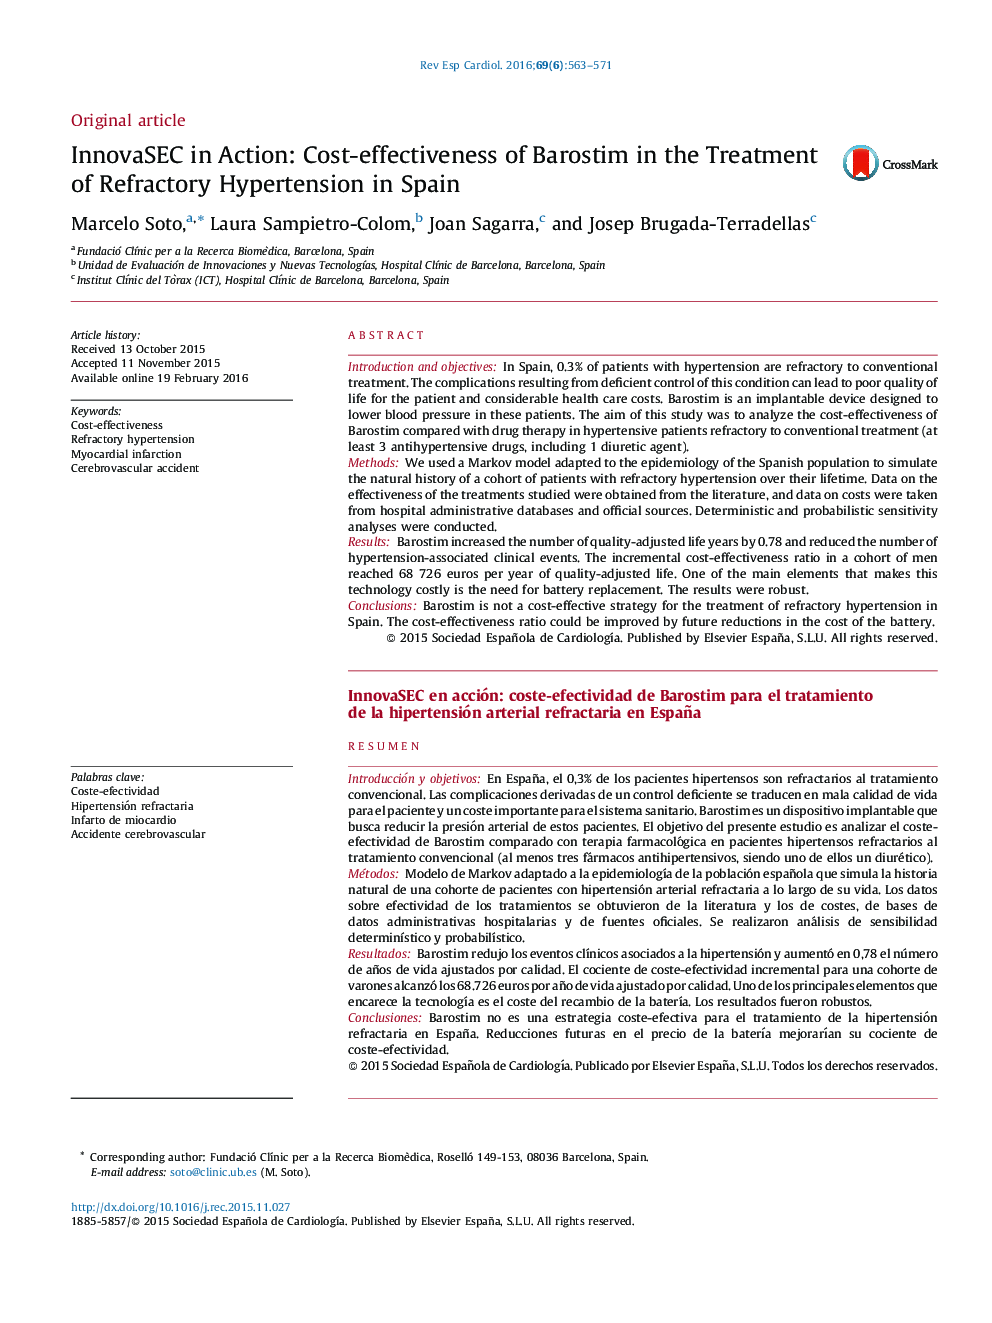 InnovaSEC in Action: Cost-effectiveness of Barostim in the Treatment of Refractory Hypertension in Spain